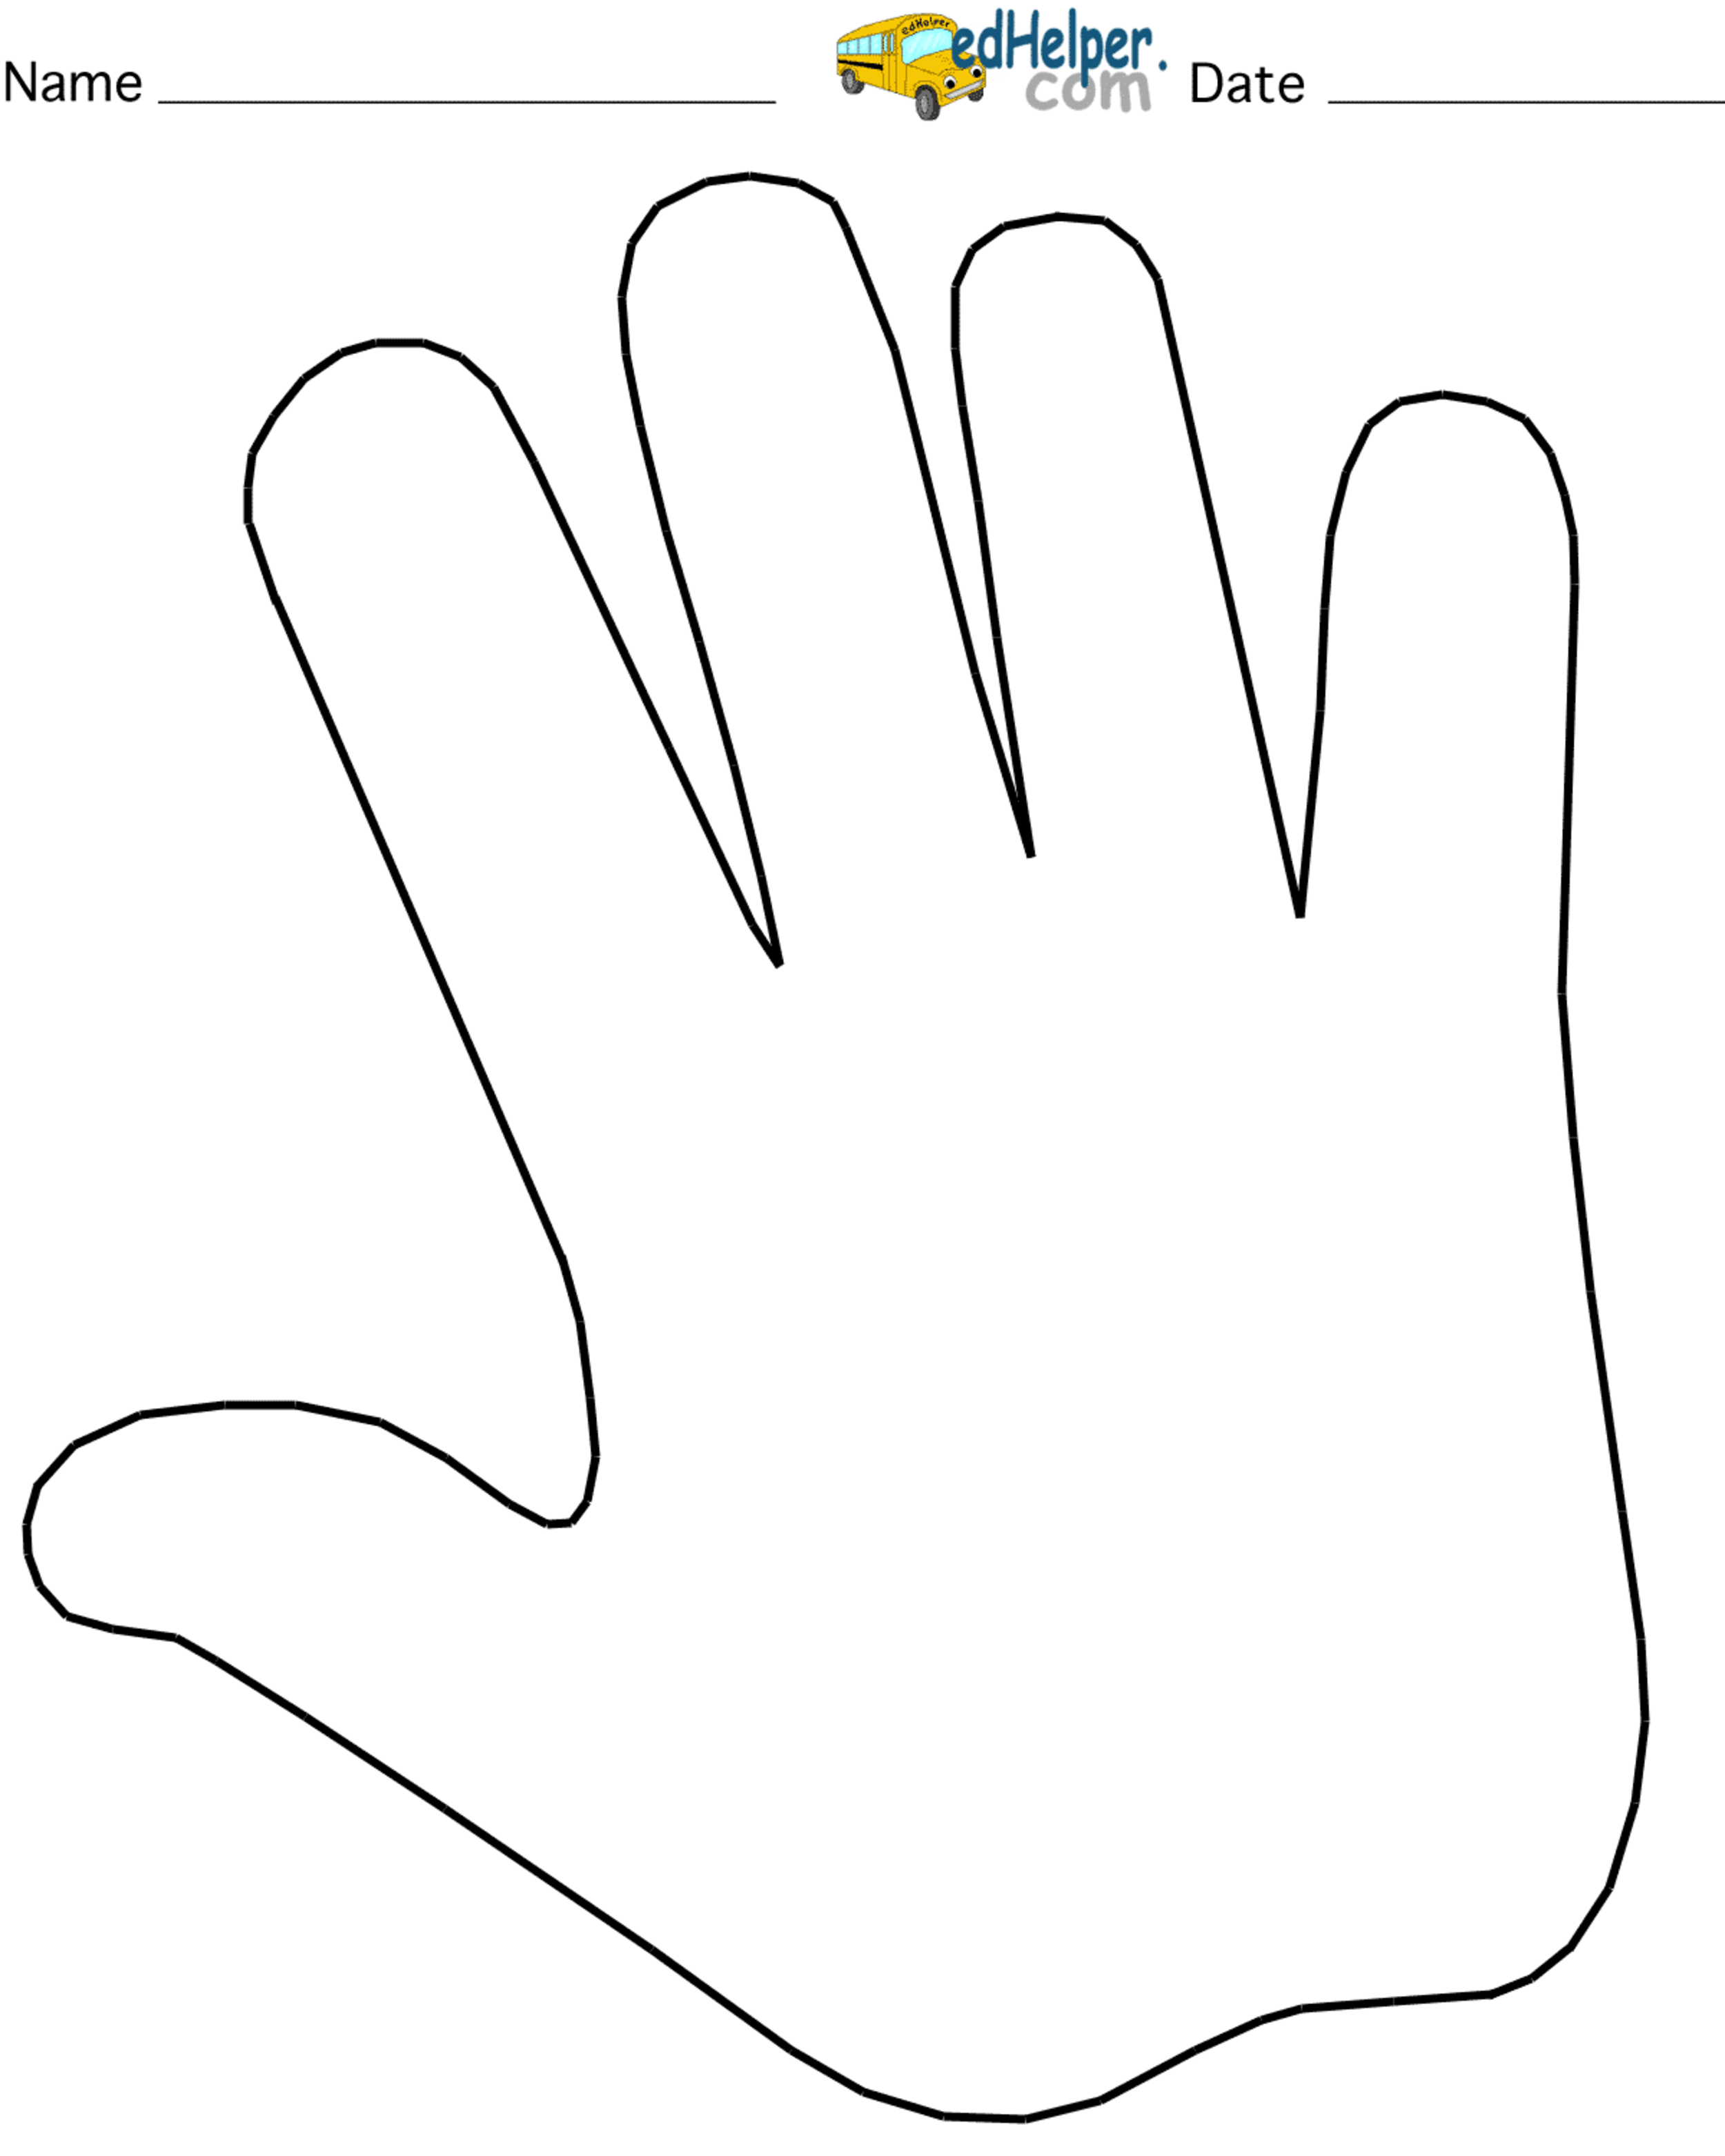 handprint outline clipart free - Clipground